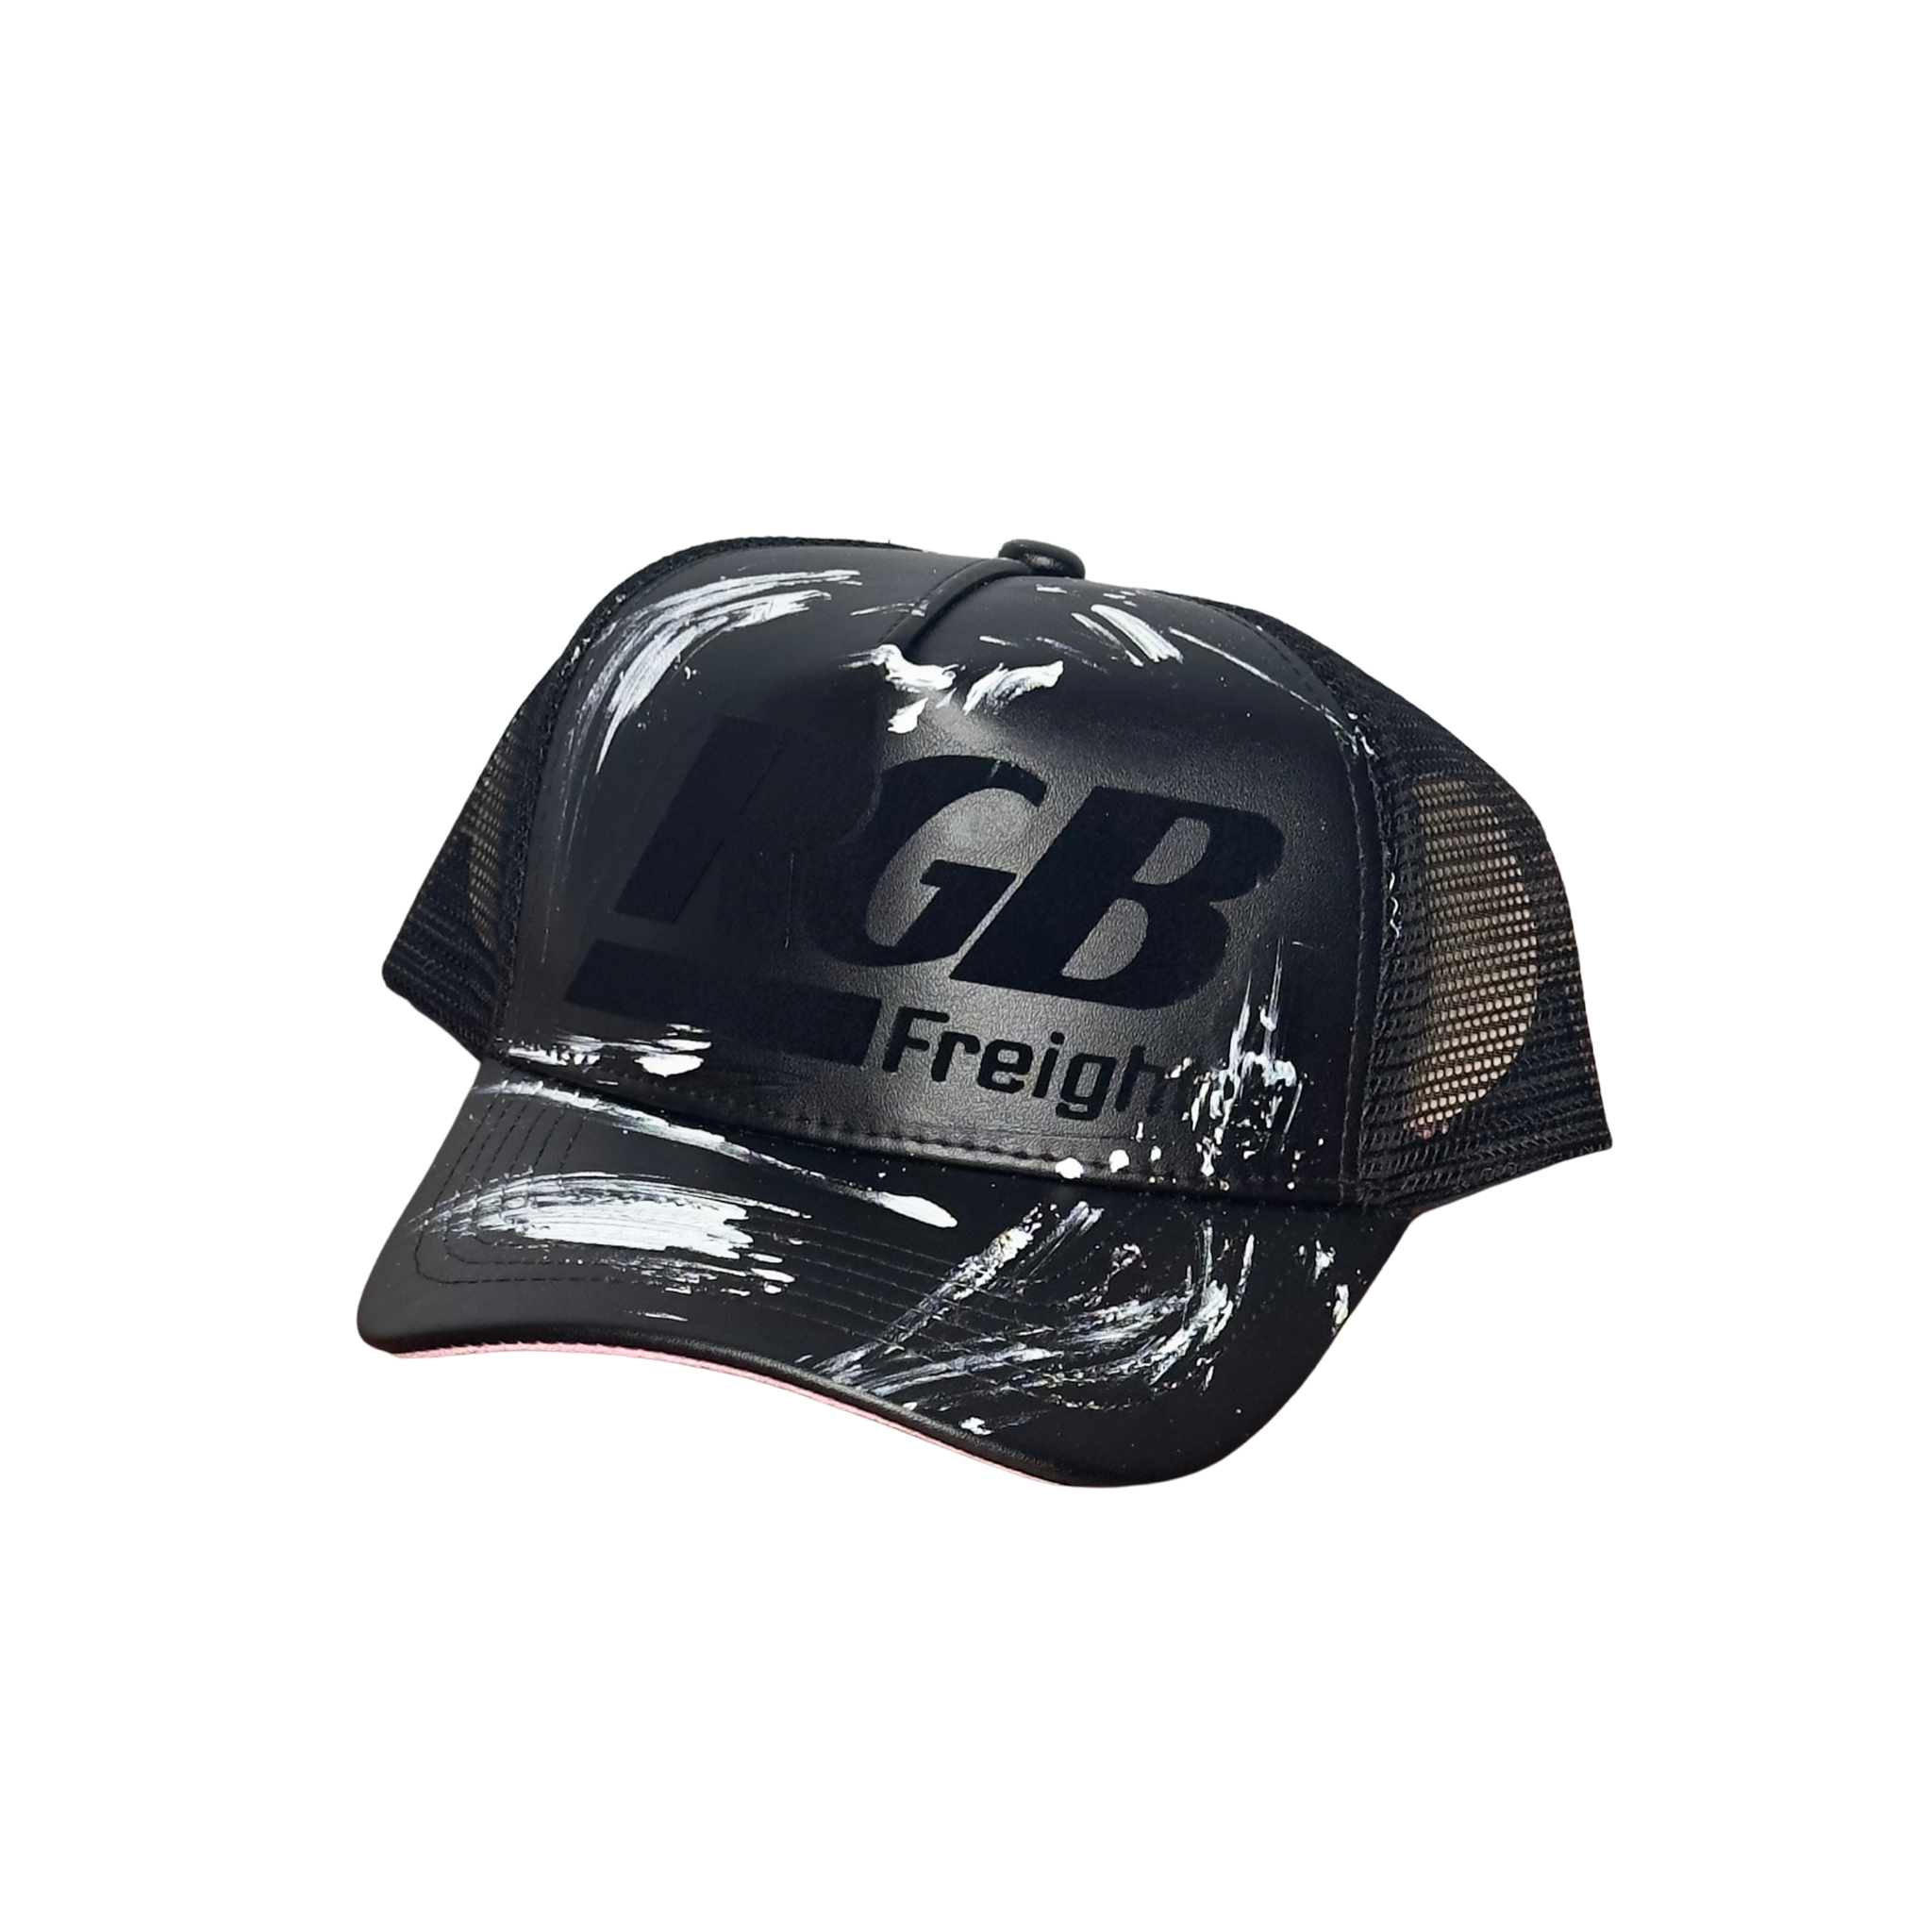 RGB FREIGHT TRUCKER HAT -  1 of 1 MARBLE LEATHER